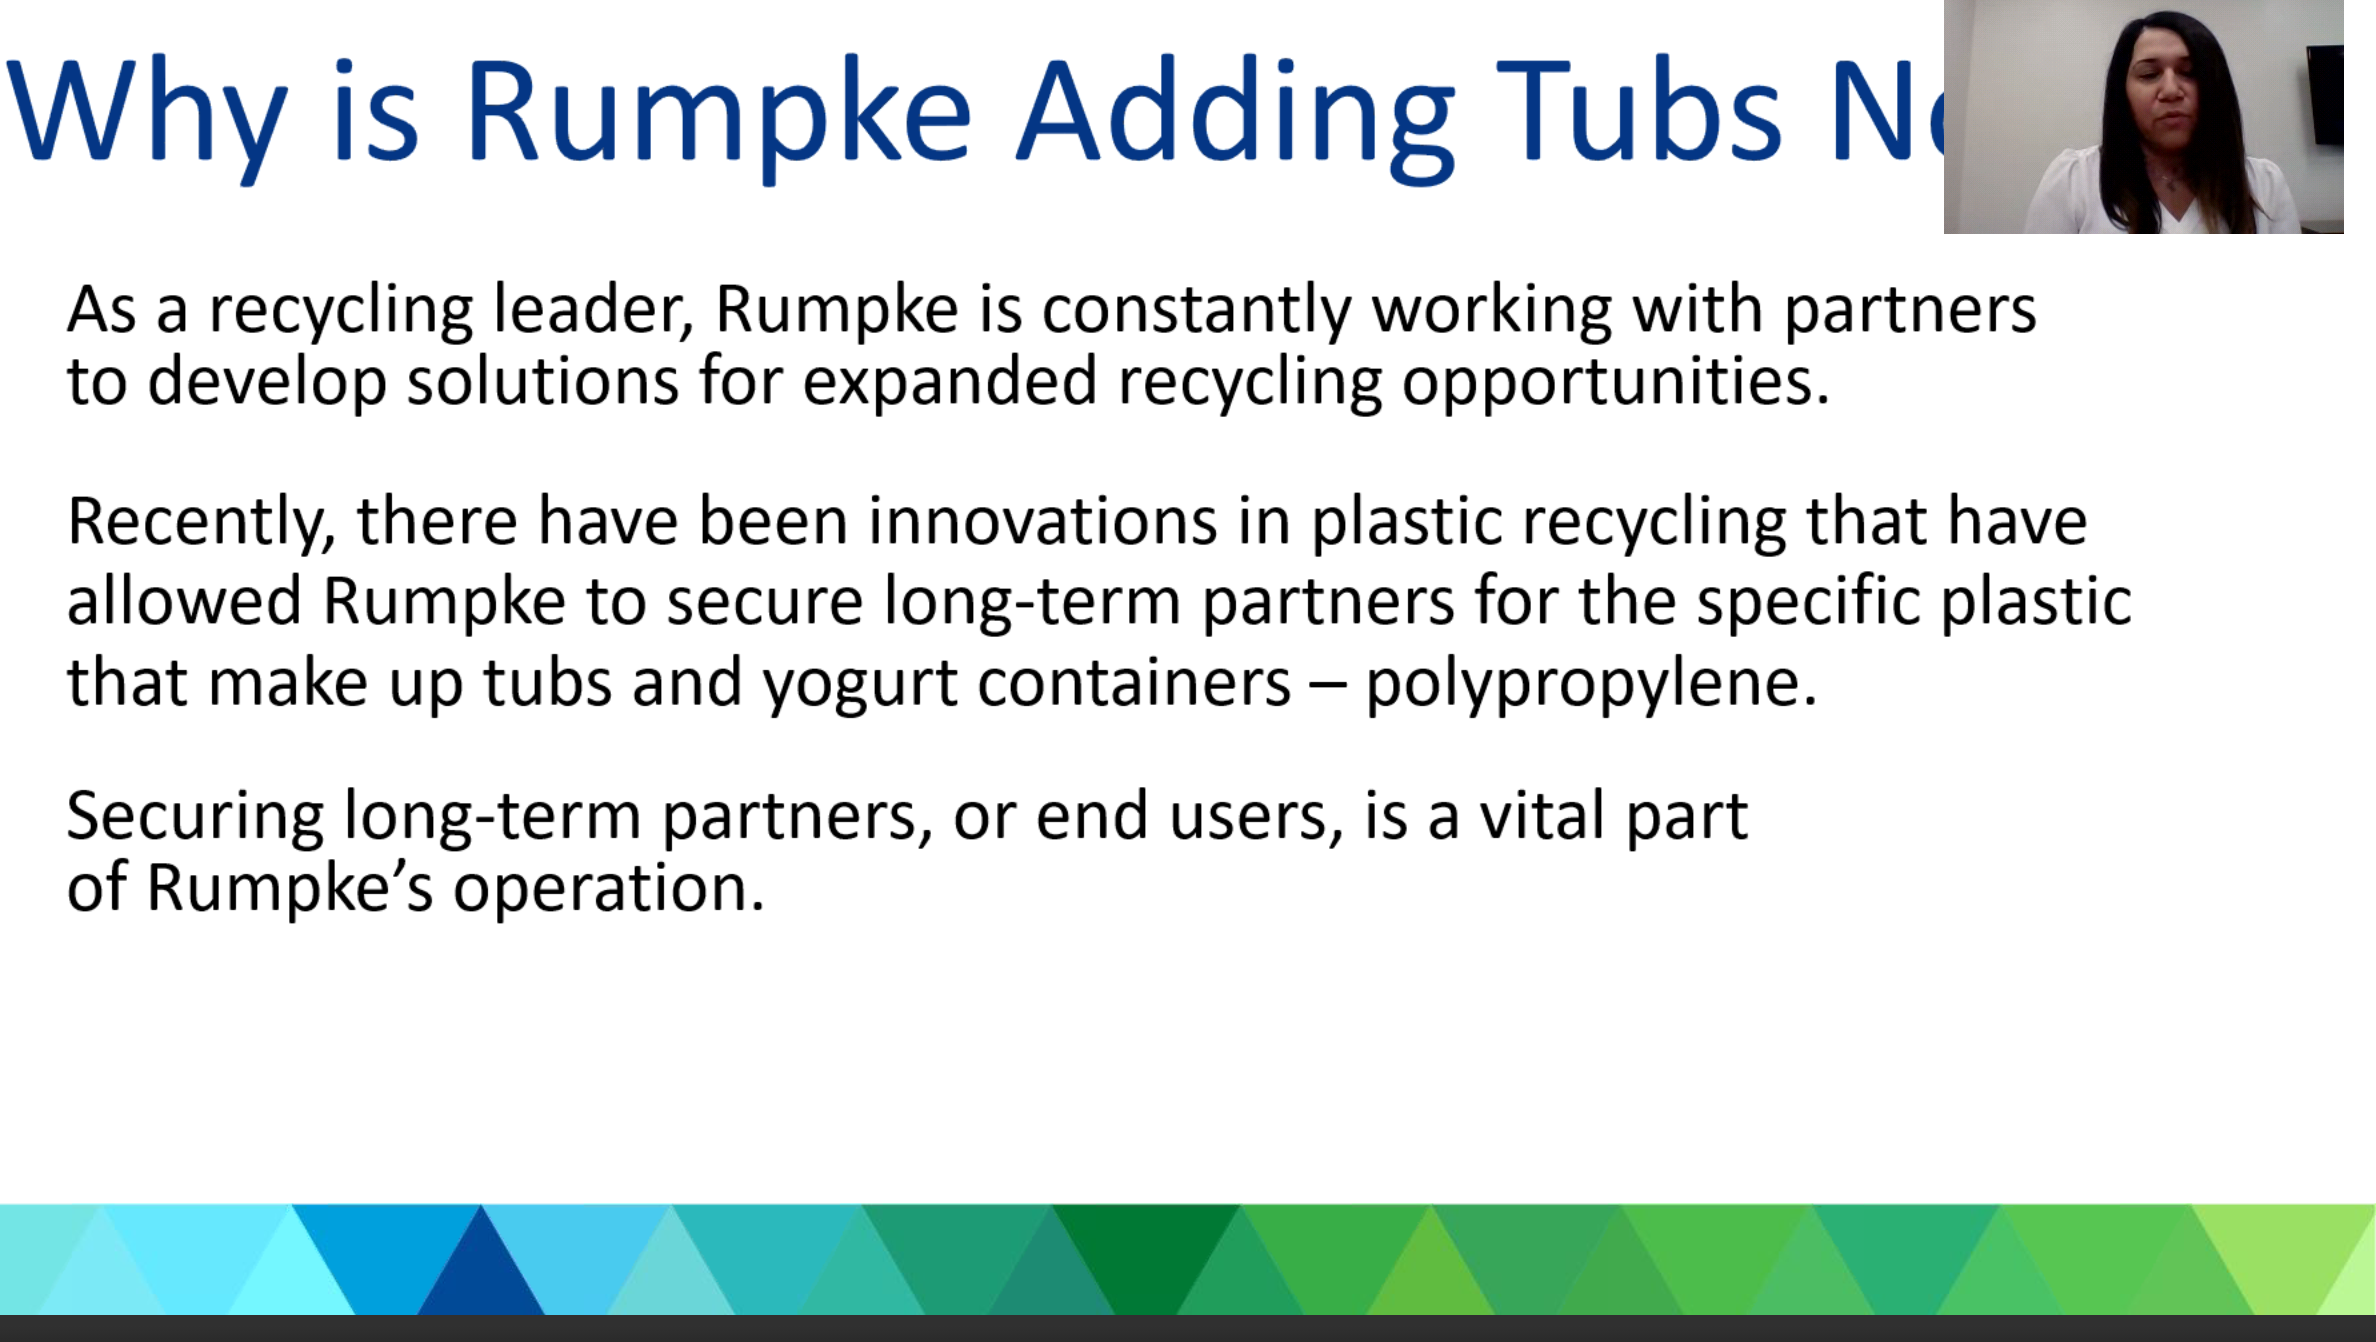 7 Why is Rumpke Adding Tubs Now.png